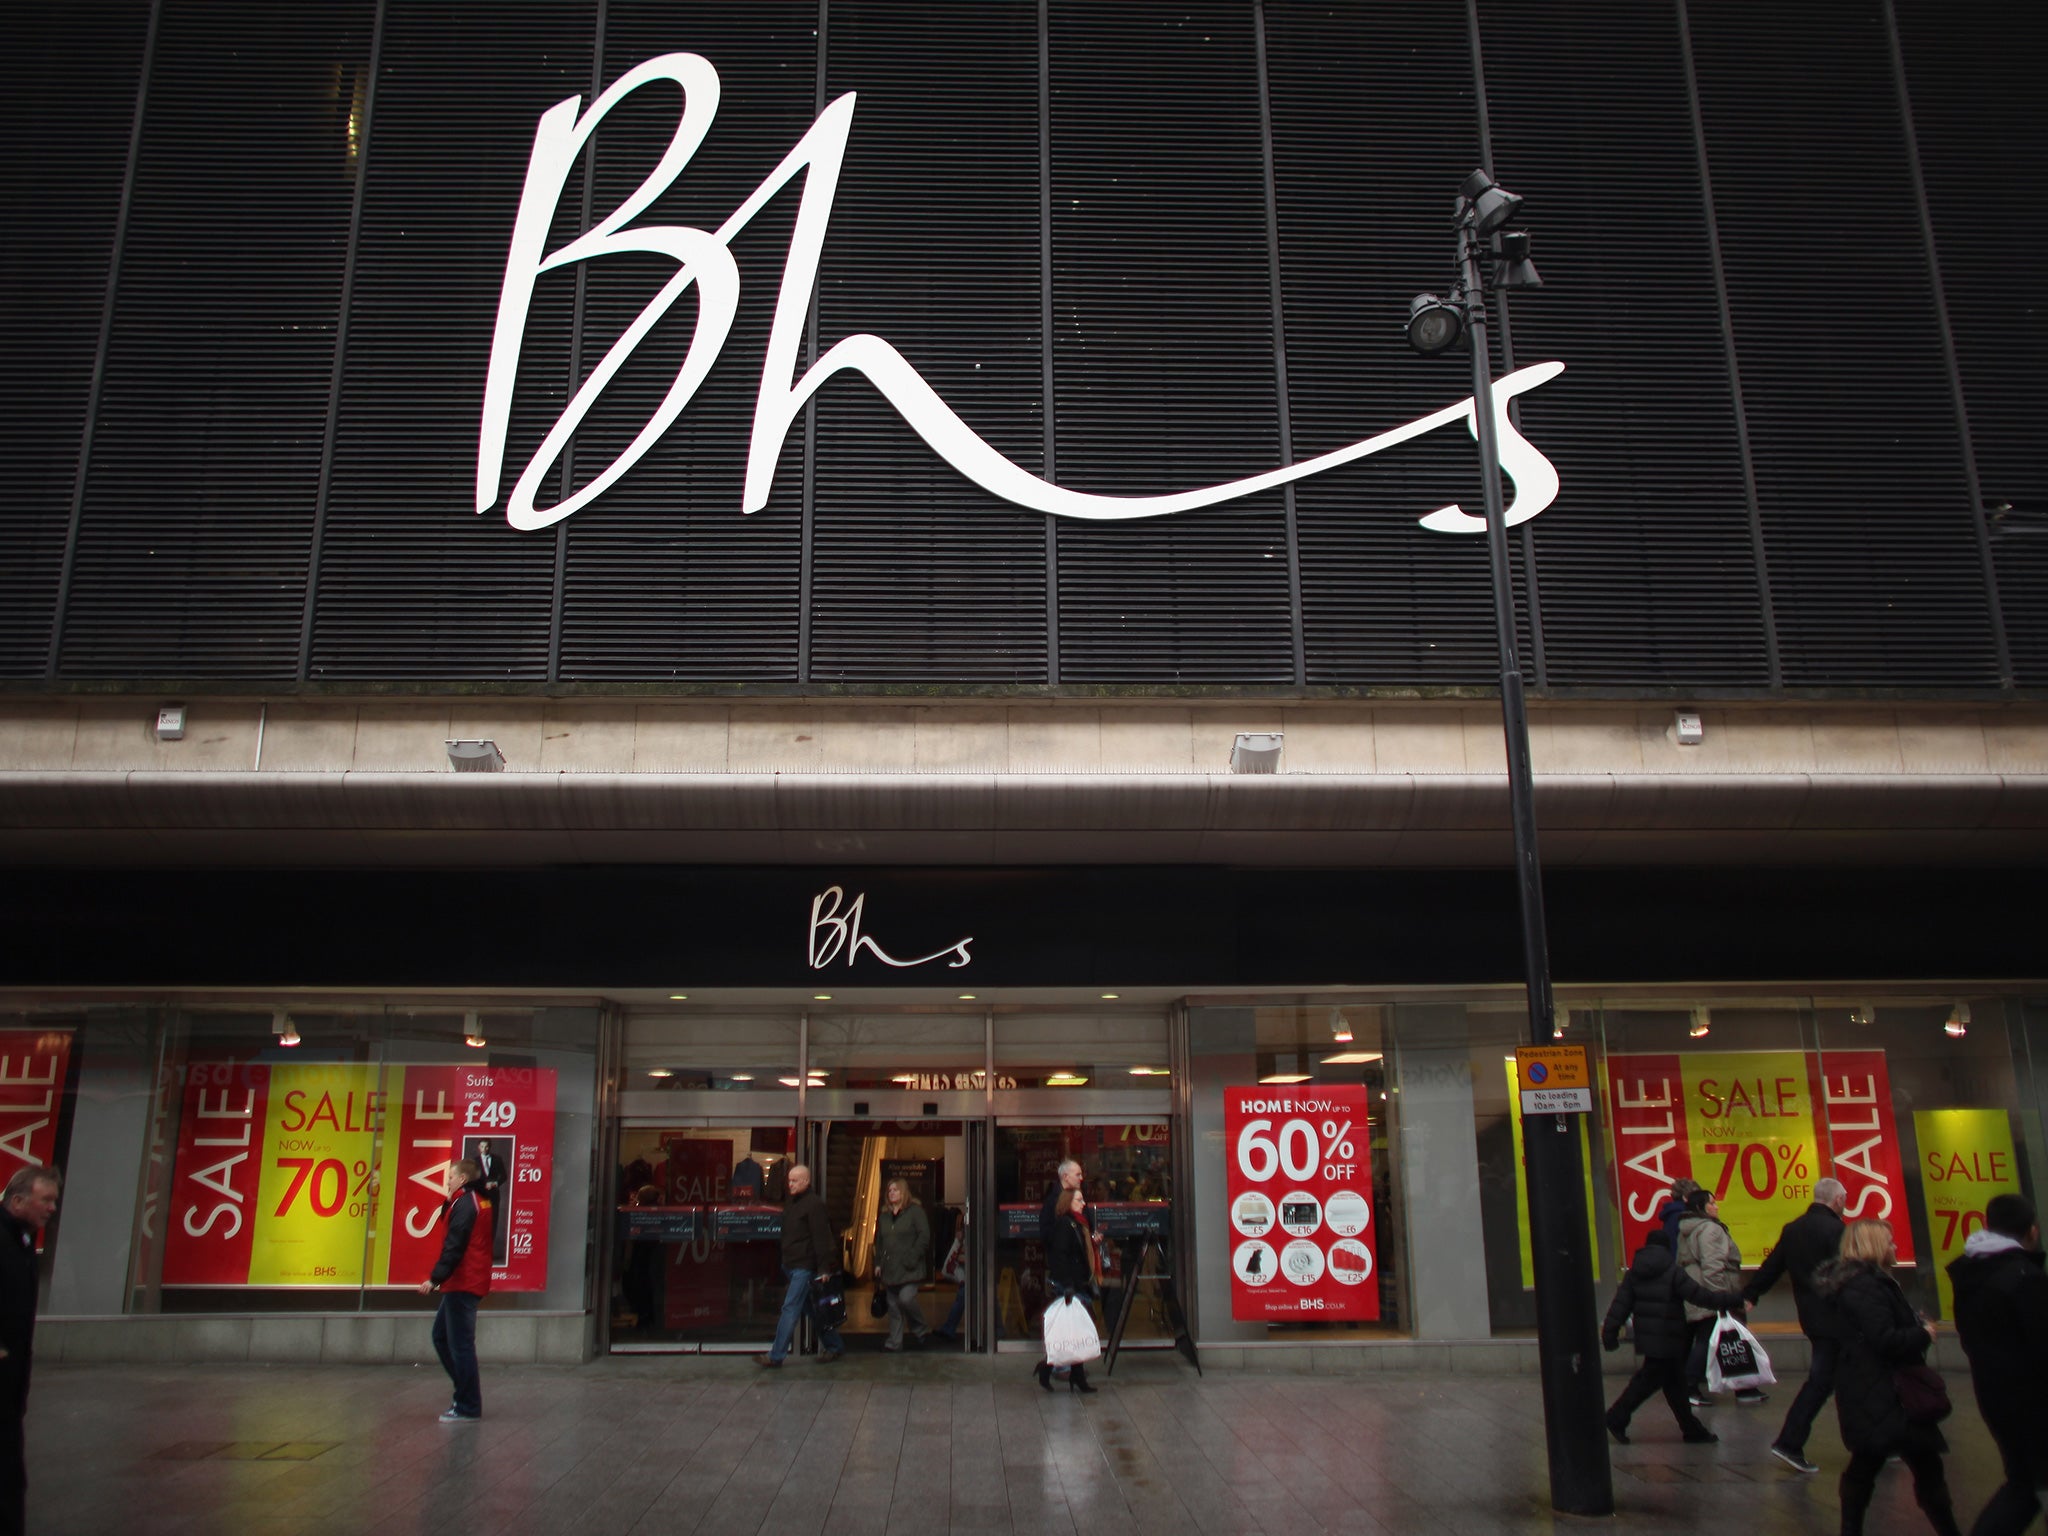 Bhs was sold by Sir Philip Green for £1